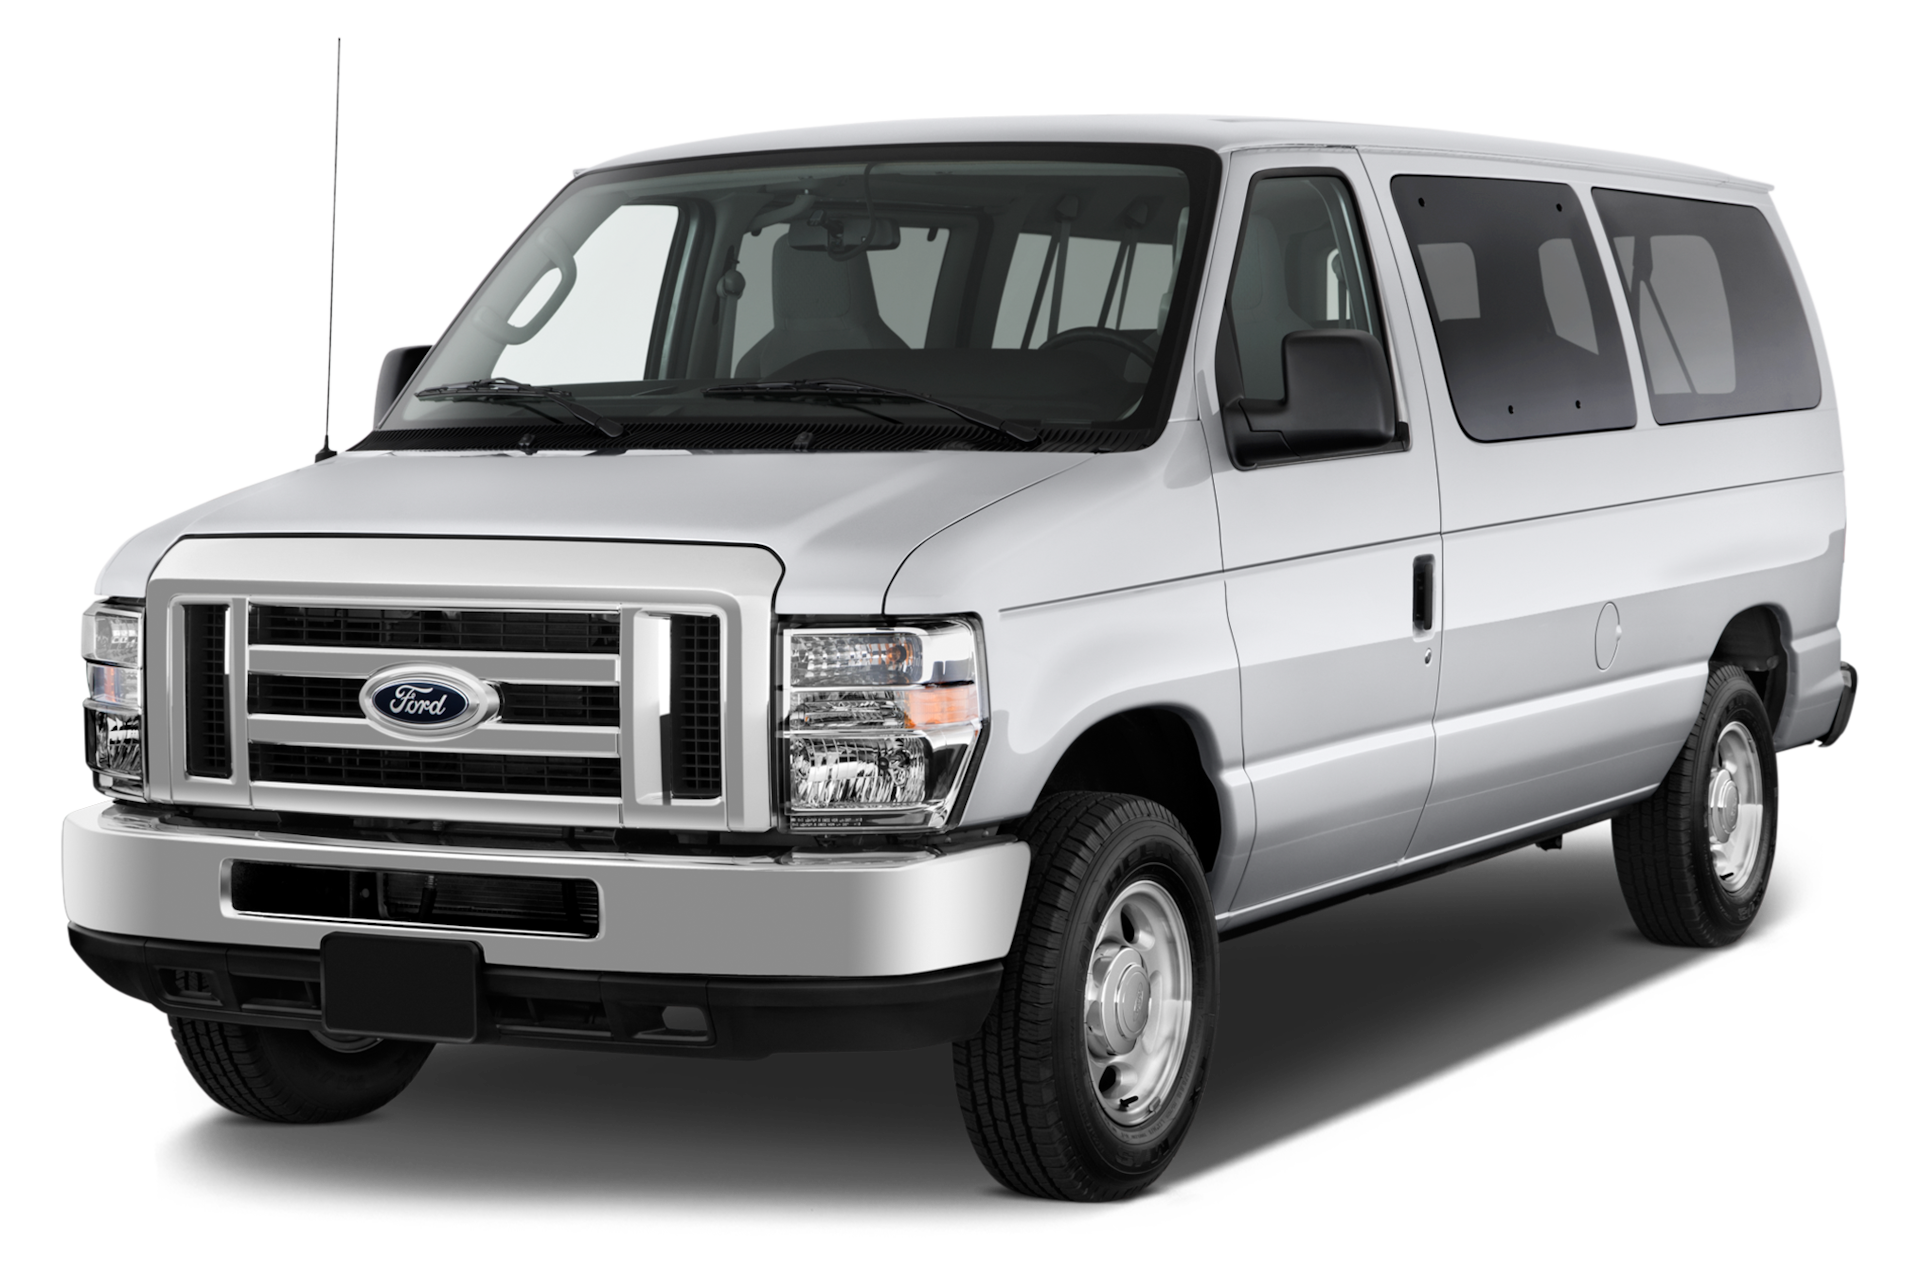 2012 Ford E-150 Prices, Reviews, and Photos - MotorTrend